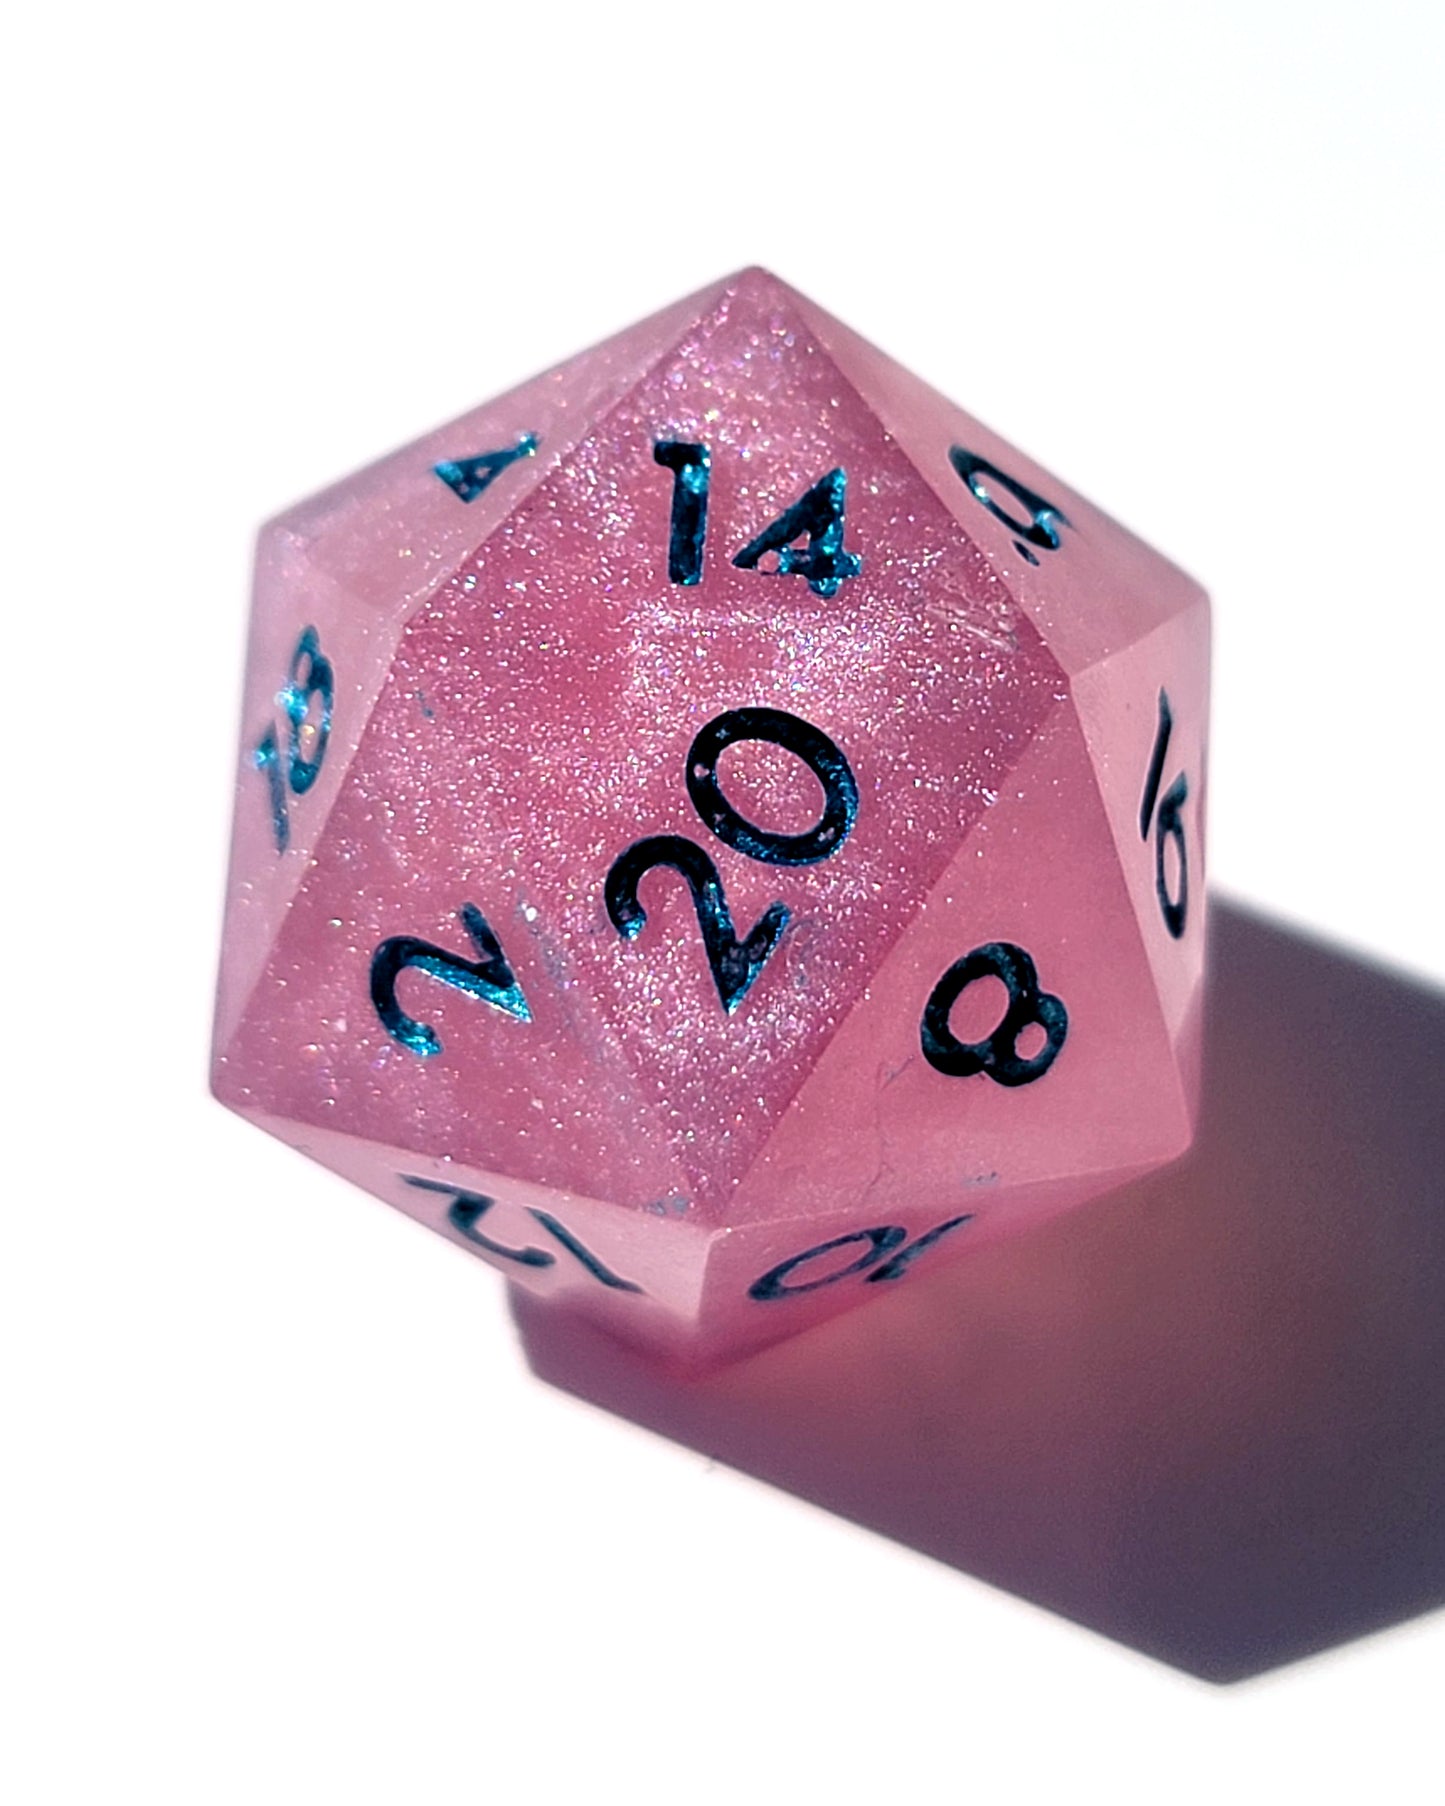 Cotton Candy delights -Single D20 | Handmade resin dice | Handcrafted D&D Dice | Handmade Dungeons and Dragons Dice